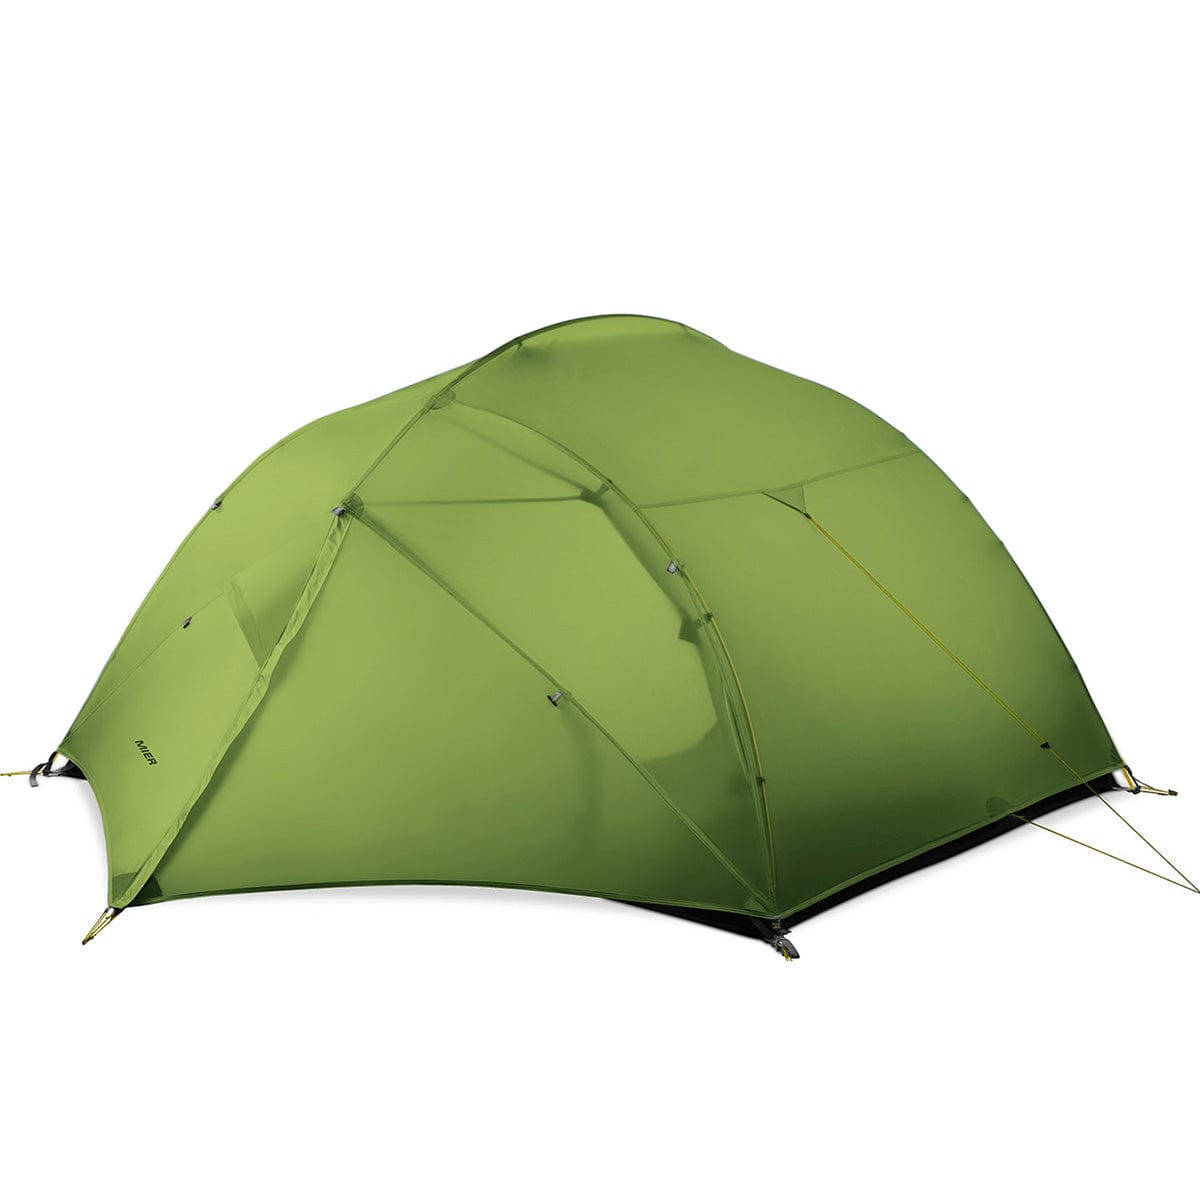 Ultralight 3 Person Backpacking Tents 3 Season with Footprint Camping Tent Green MIER